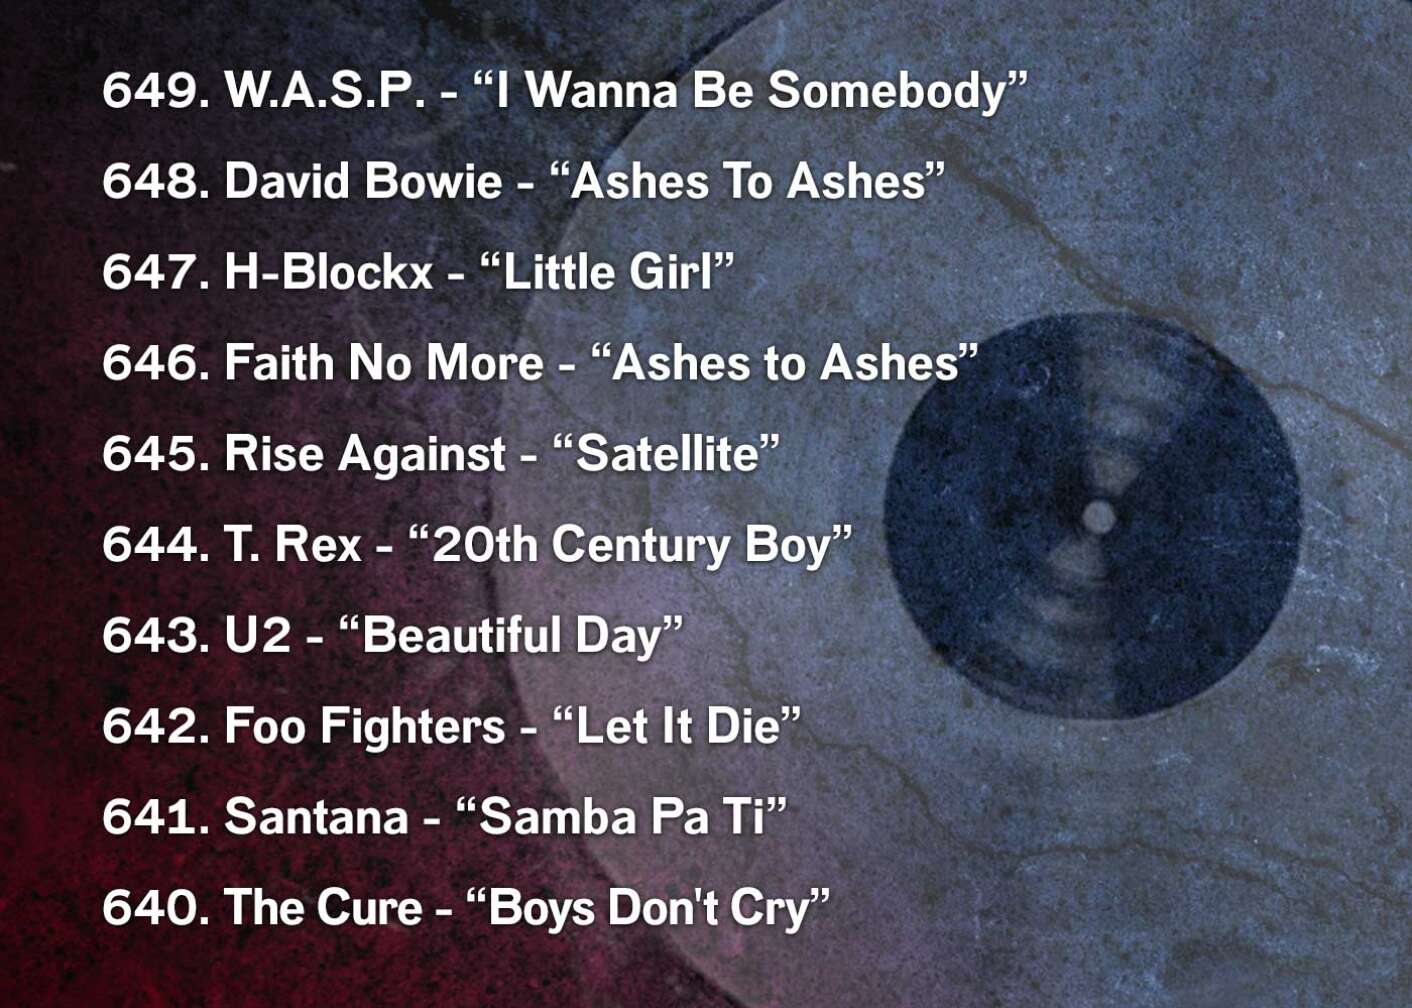 649. W.A.S.P. - “I Wanna Be Somebody” 648. David Bowie - “Ashes To Ashes” 647. H-Blockx - “Little Girl” 646. Faith No More - “Ashes to Ashes” 645. Rise Against - “Satellite” 644. T. Rex - “20th Century Boy” 643. U2 - “Beautiful Day” 642. Foo Fighters - “Let It Die” 641. Santana - “Samba Pa Ti” 640. The Cure - “Boys Don't Cry”